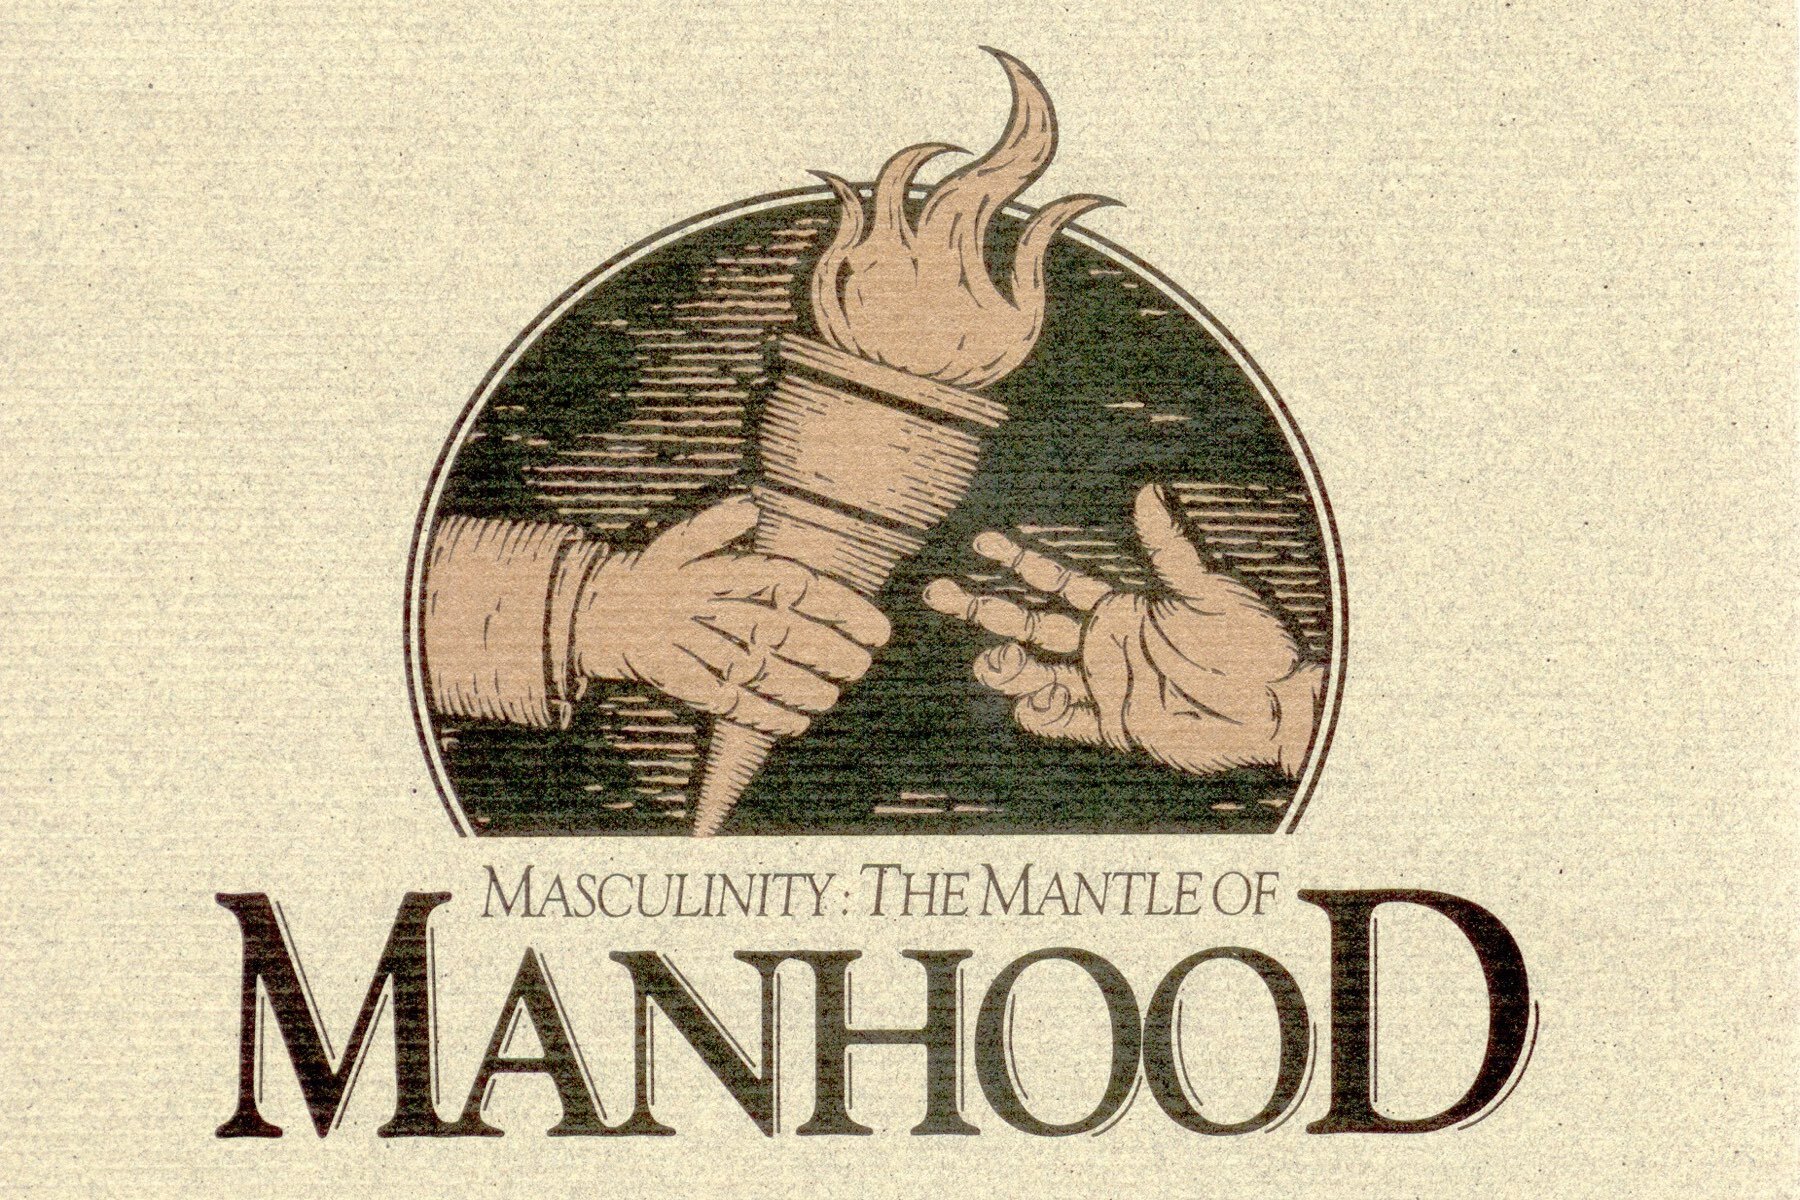 Masculinity - The Mantle of Manhood